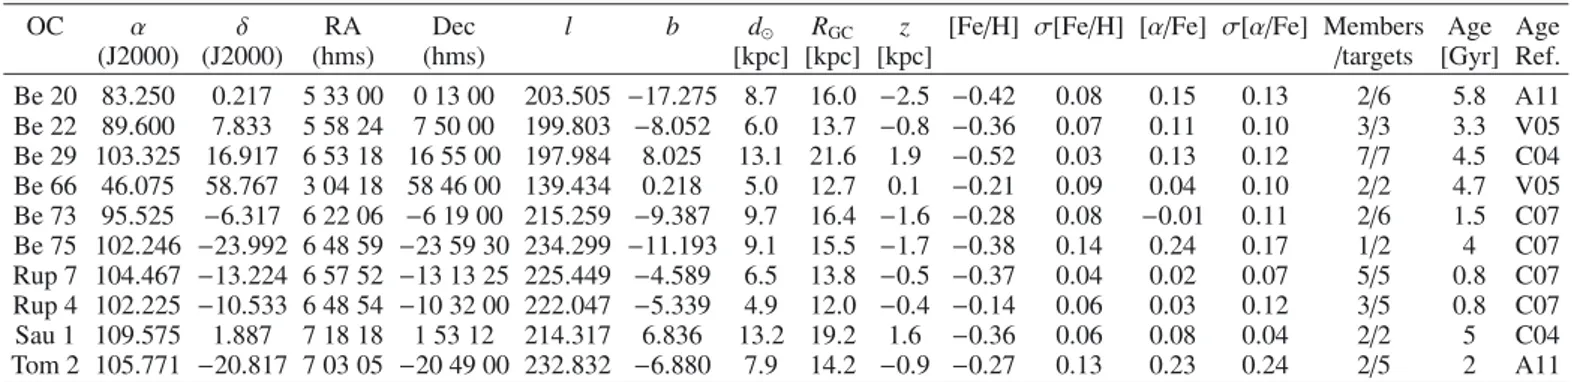 Table 1. Summary of main parameters for the ten clusters under study.